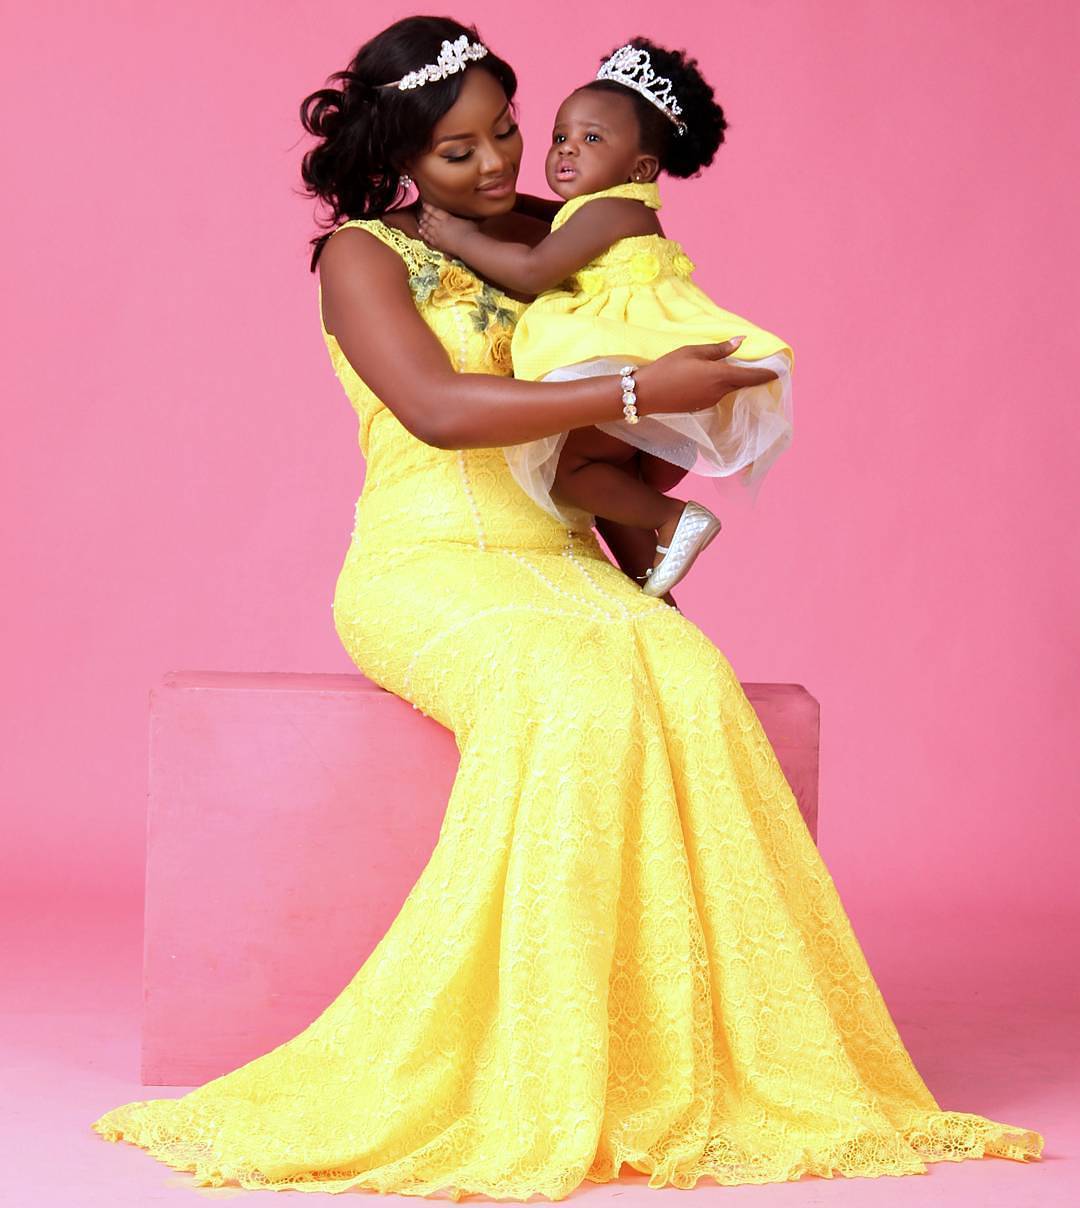 Beautiful Mummy And Me Trend We are Loving This Week.